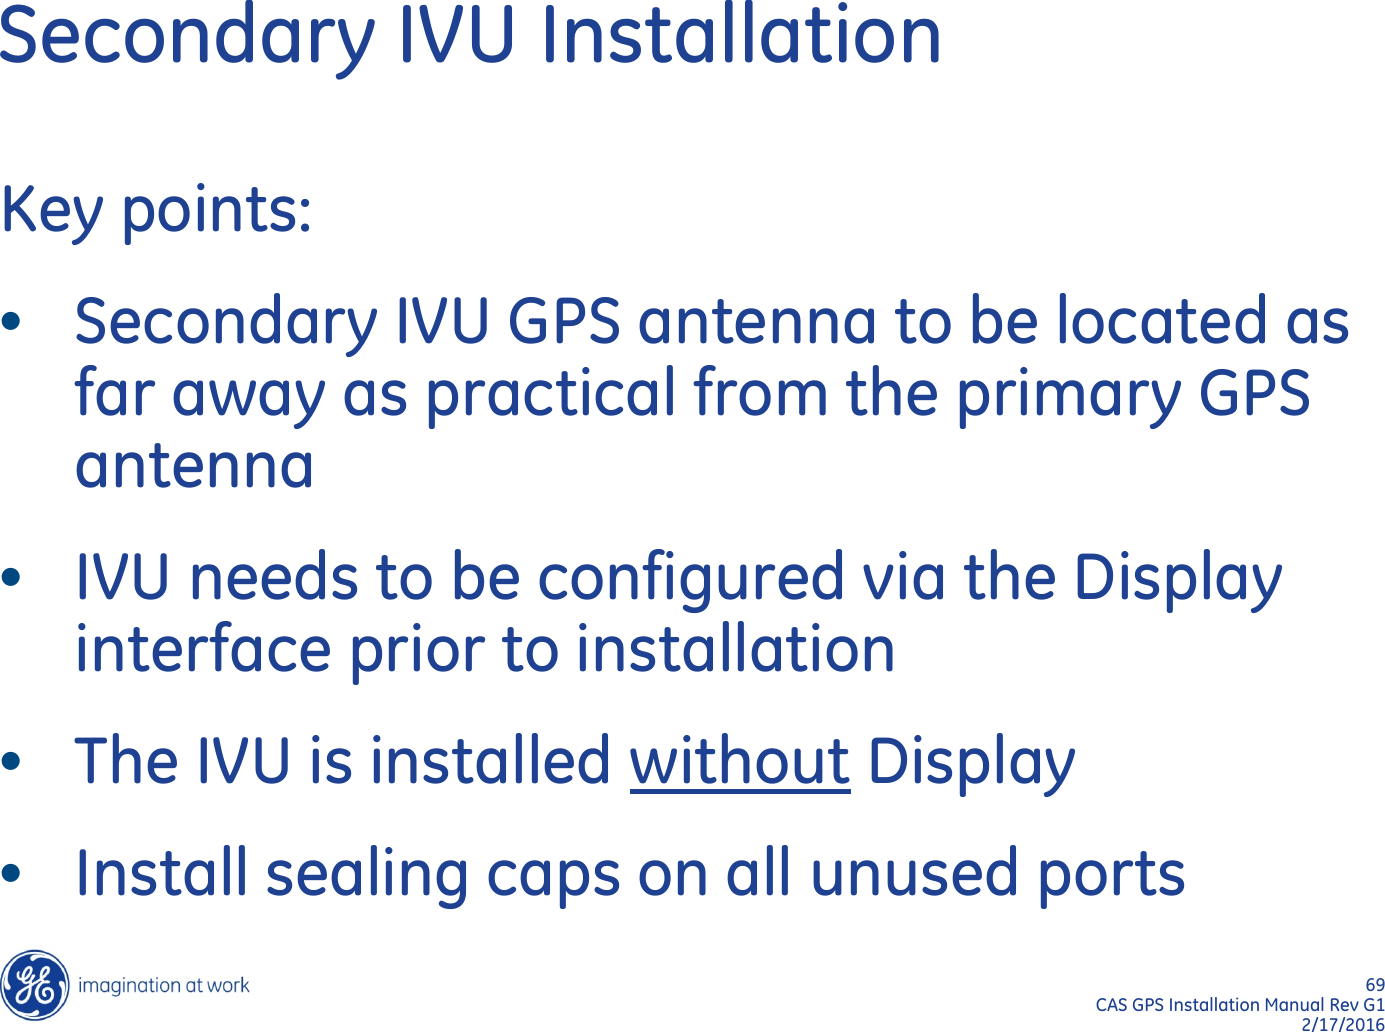 69  CAS GPS Installation Manual Rev G1 2/17/2016 Secondary IVU Installation Key points: •Secondary IVU GPS antenna to be located as far away as practical from the primary GPS antenna •IVU needs to be configured via the Display interface prior to installation •The IVU is installed without Display •Install sealing caps on all unused ports 